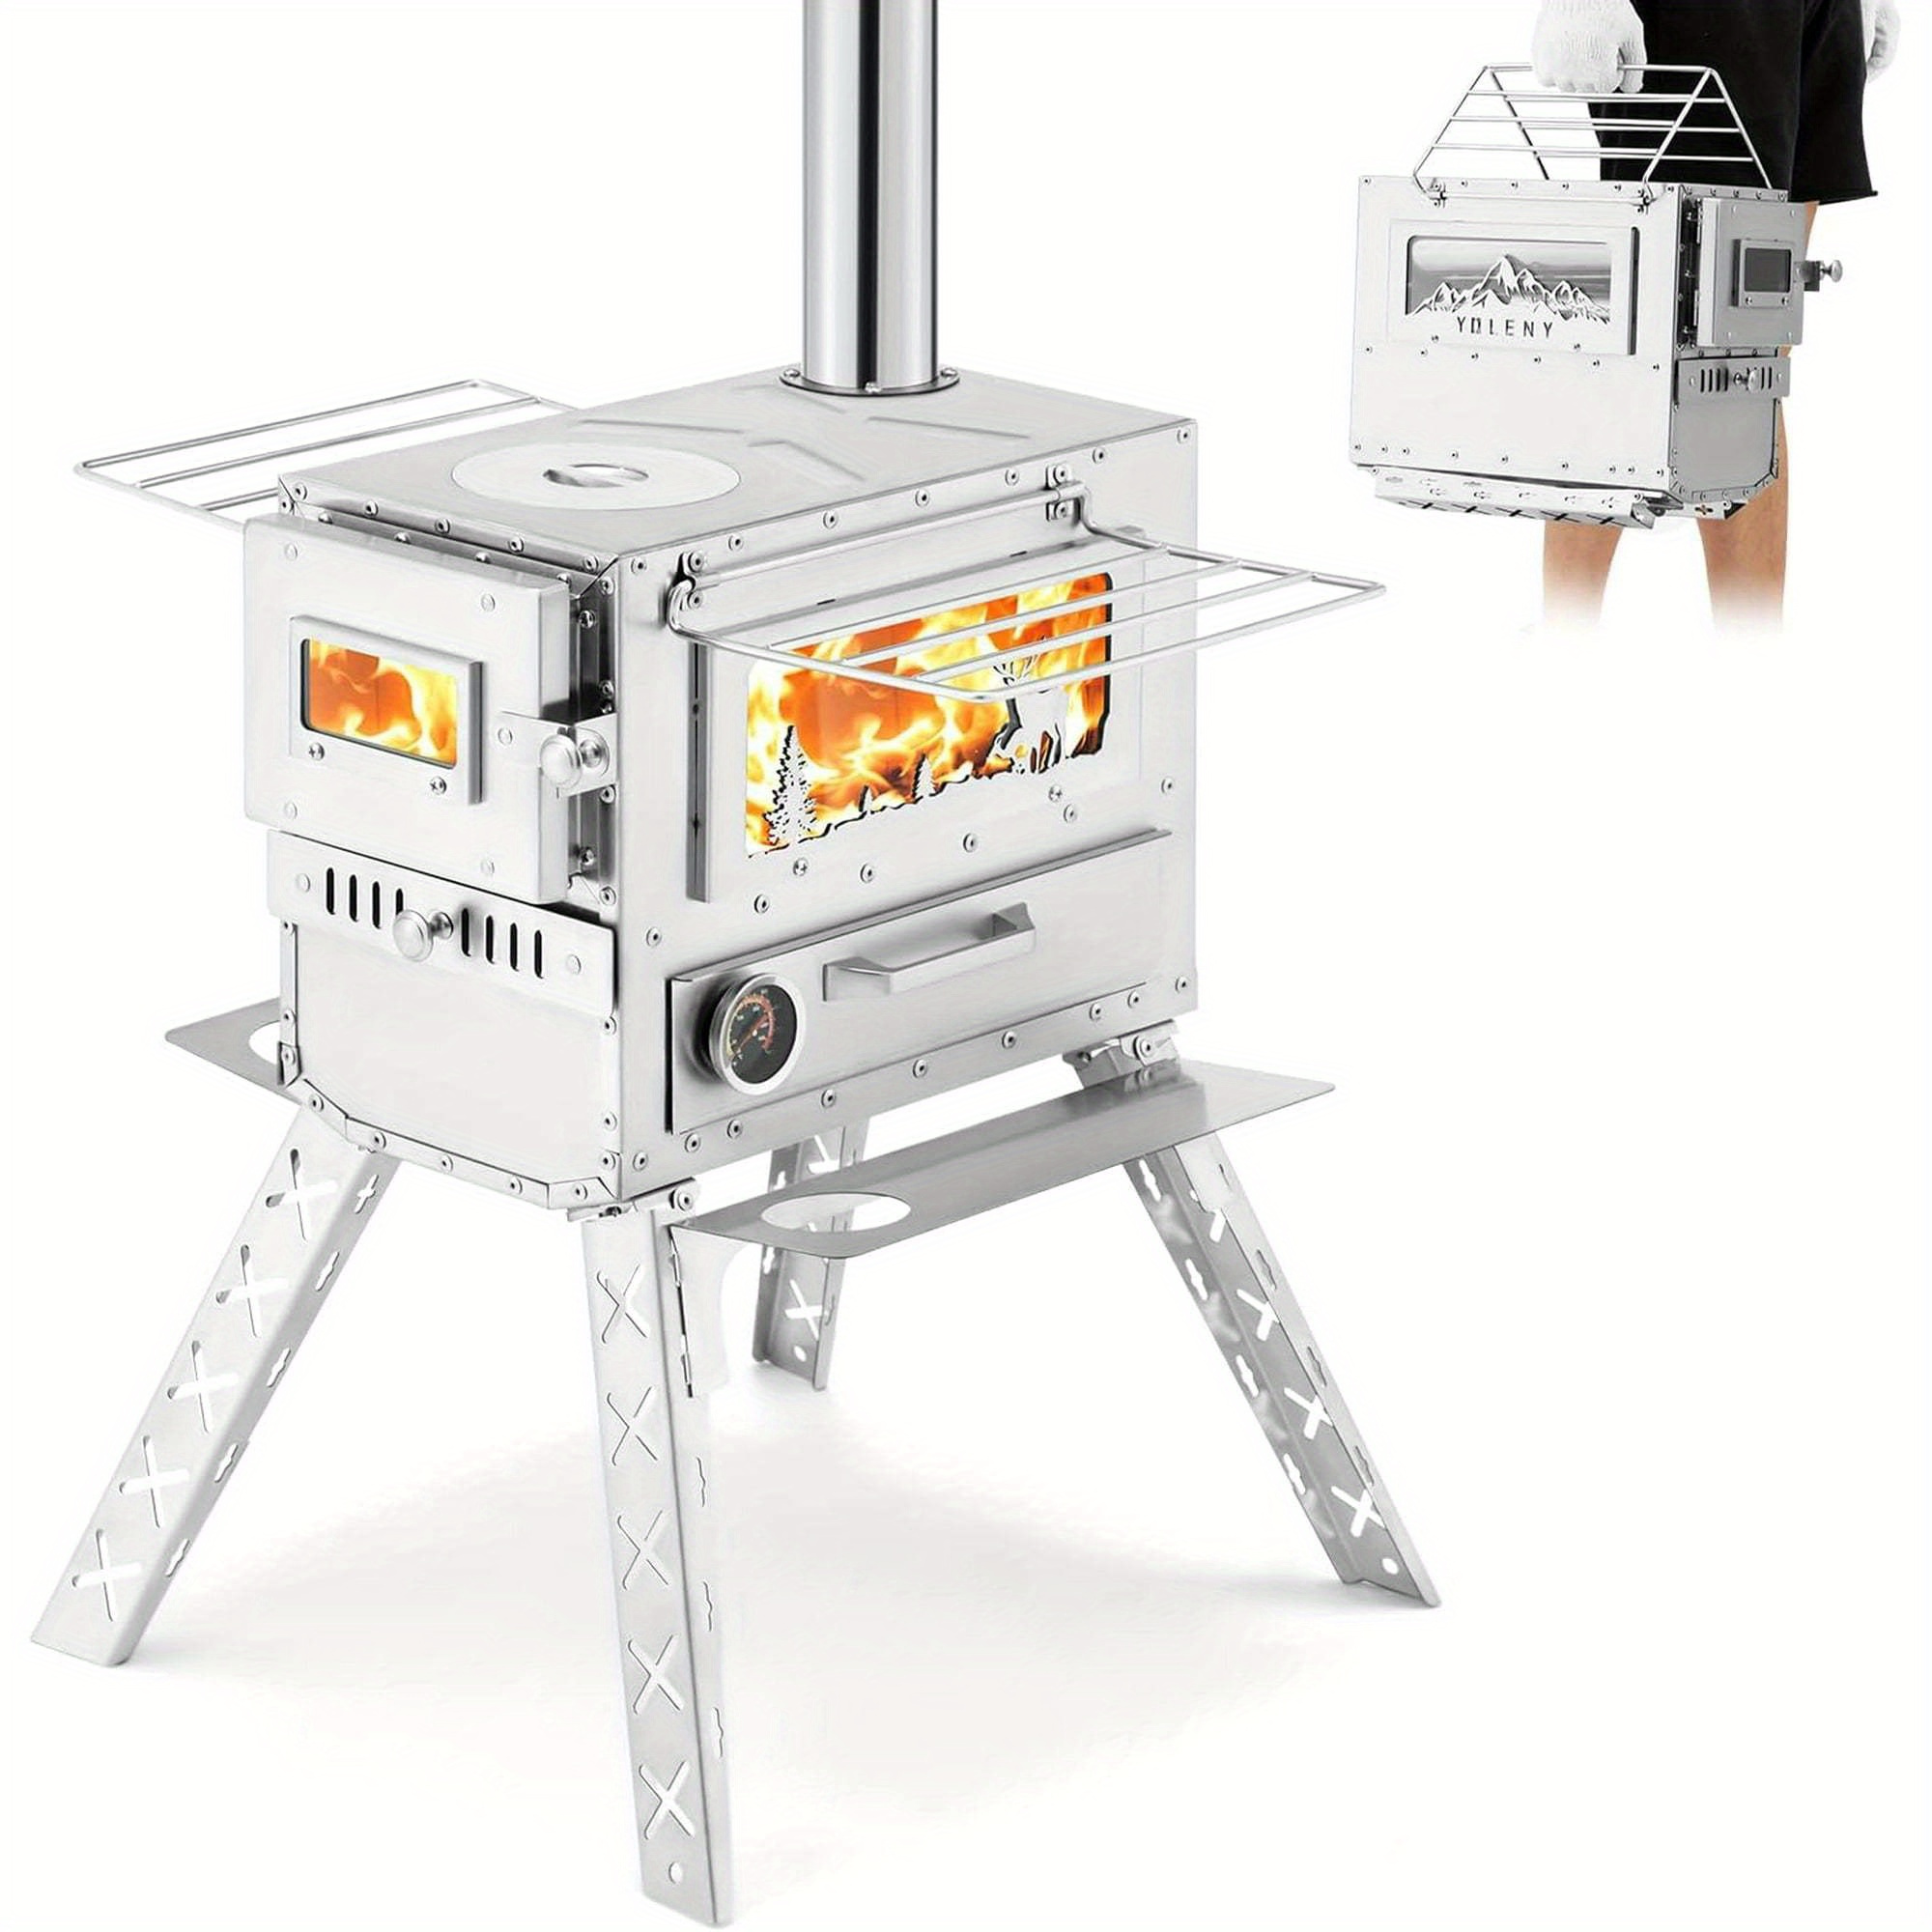 

Wood Burning Stove, Tent Stoves With Wood Oven, Camping Wood Stove For Outdoor Cookout, Hiking, Travel, Backpacking Trips